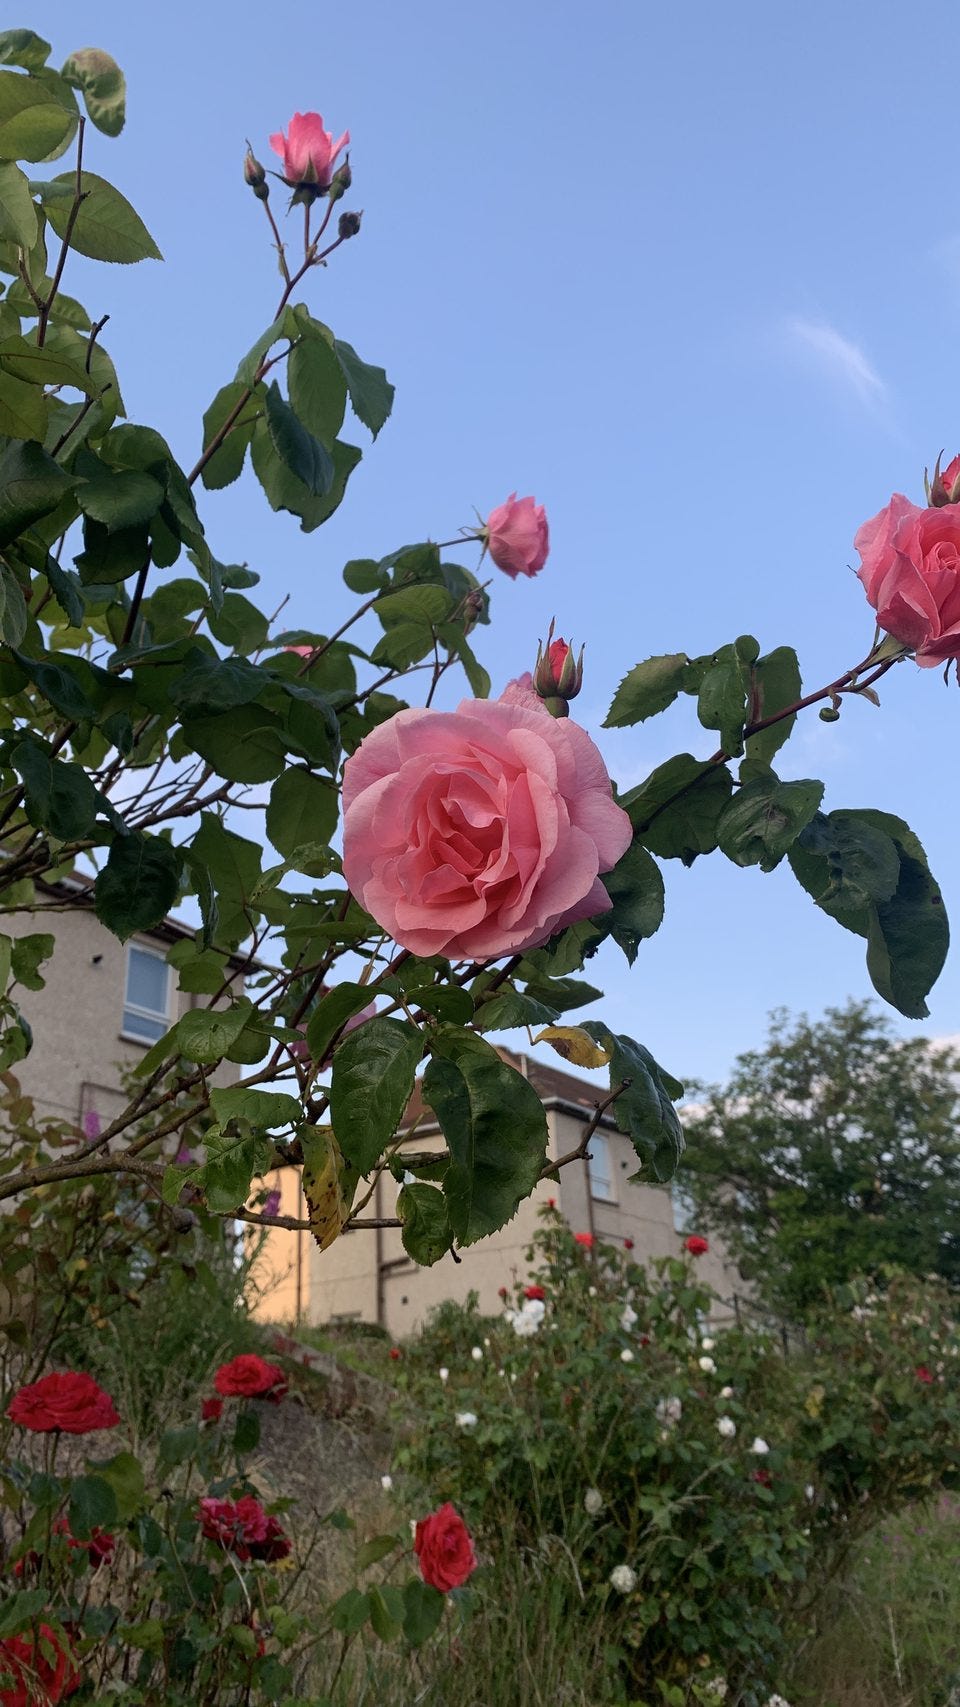 Perfect pink roses blooming against a dusky blue sky.